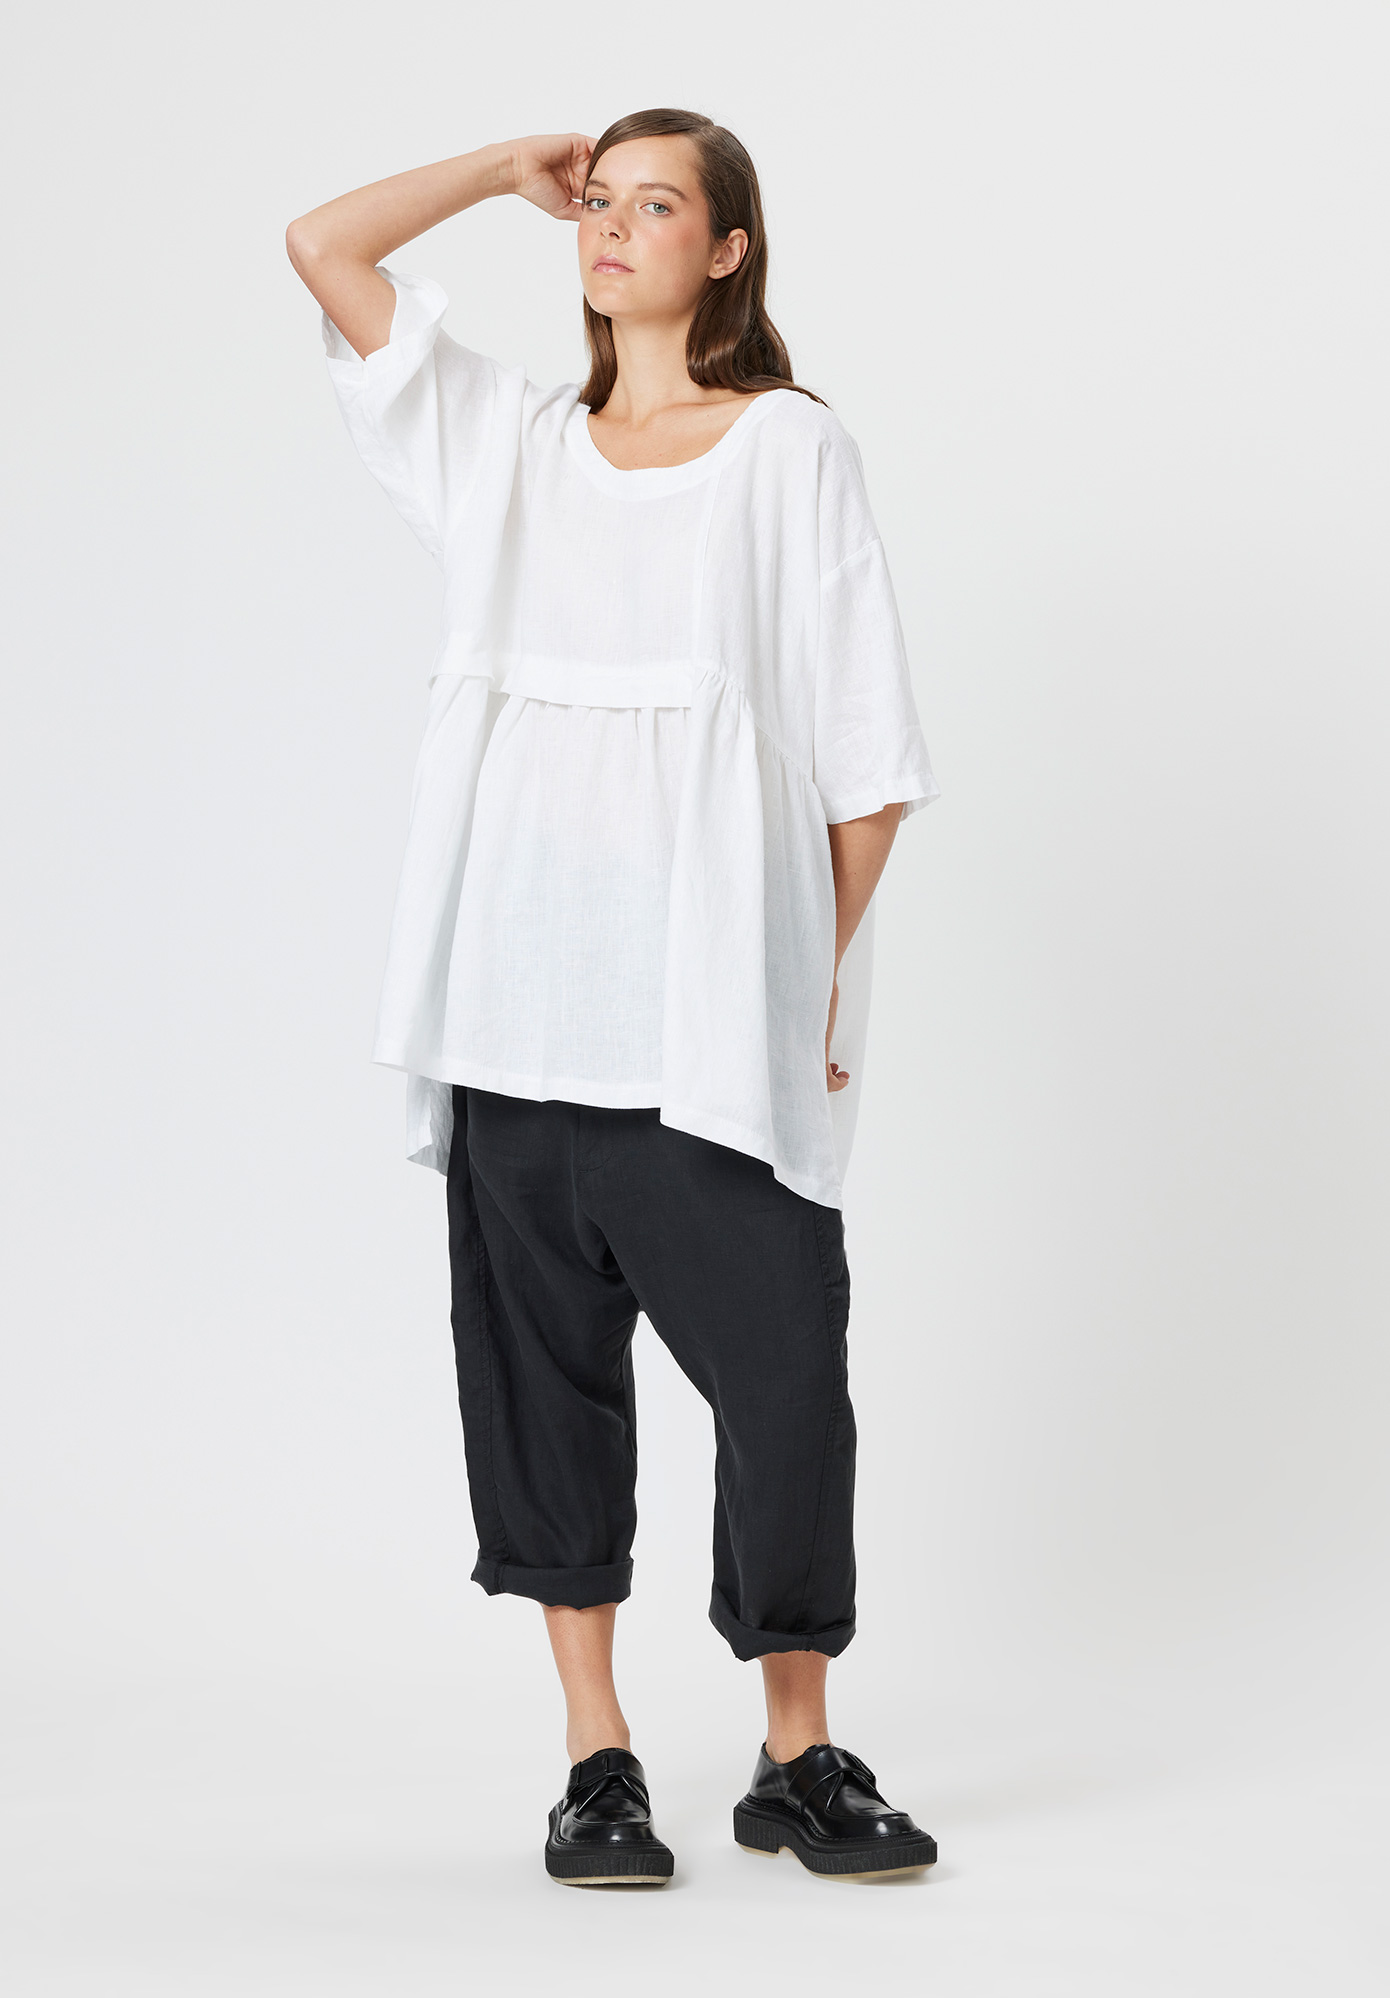 PAL OFFNER - LOOSE TUNIC - WHITE